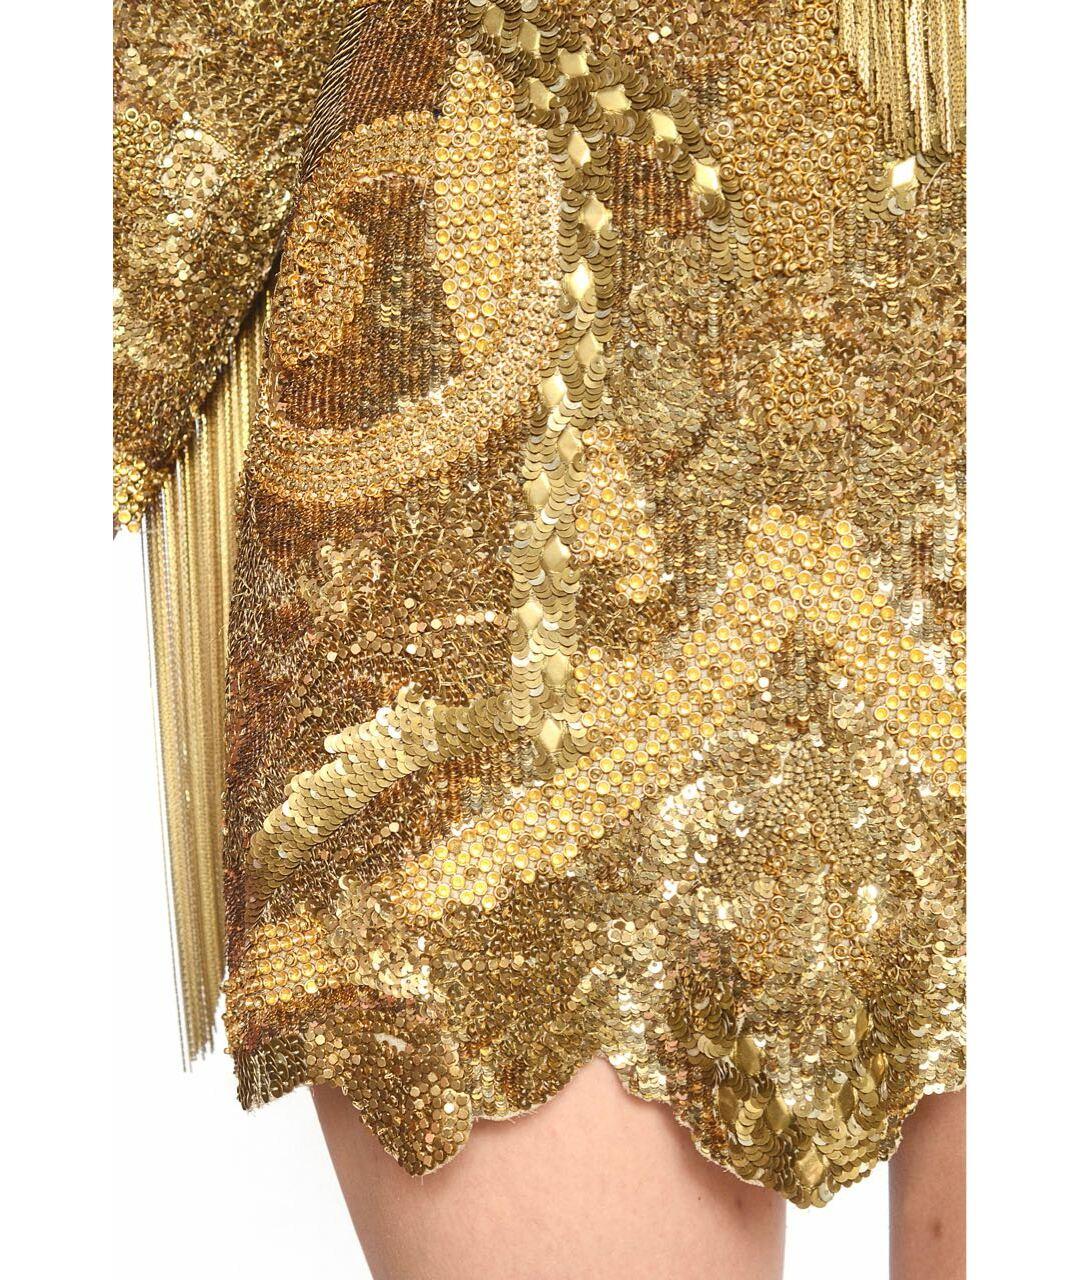 2010 Balmain Fully Beaded and Fringed Gold Dress from Celebrity 